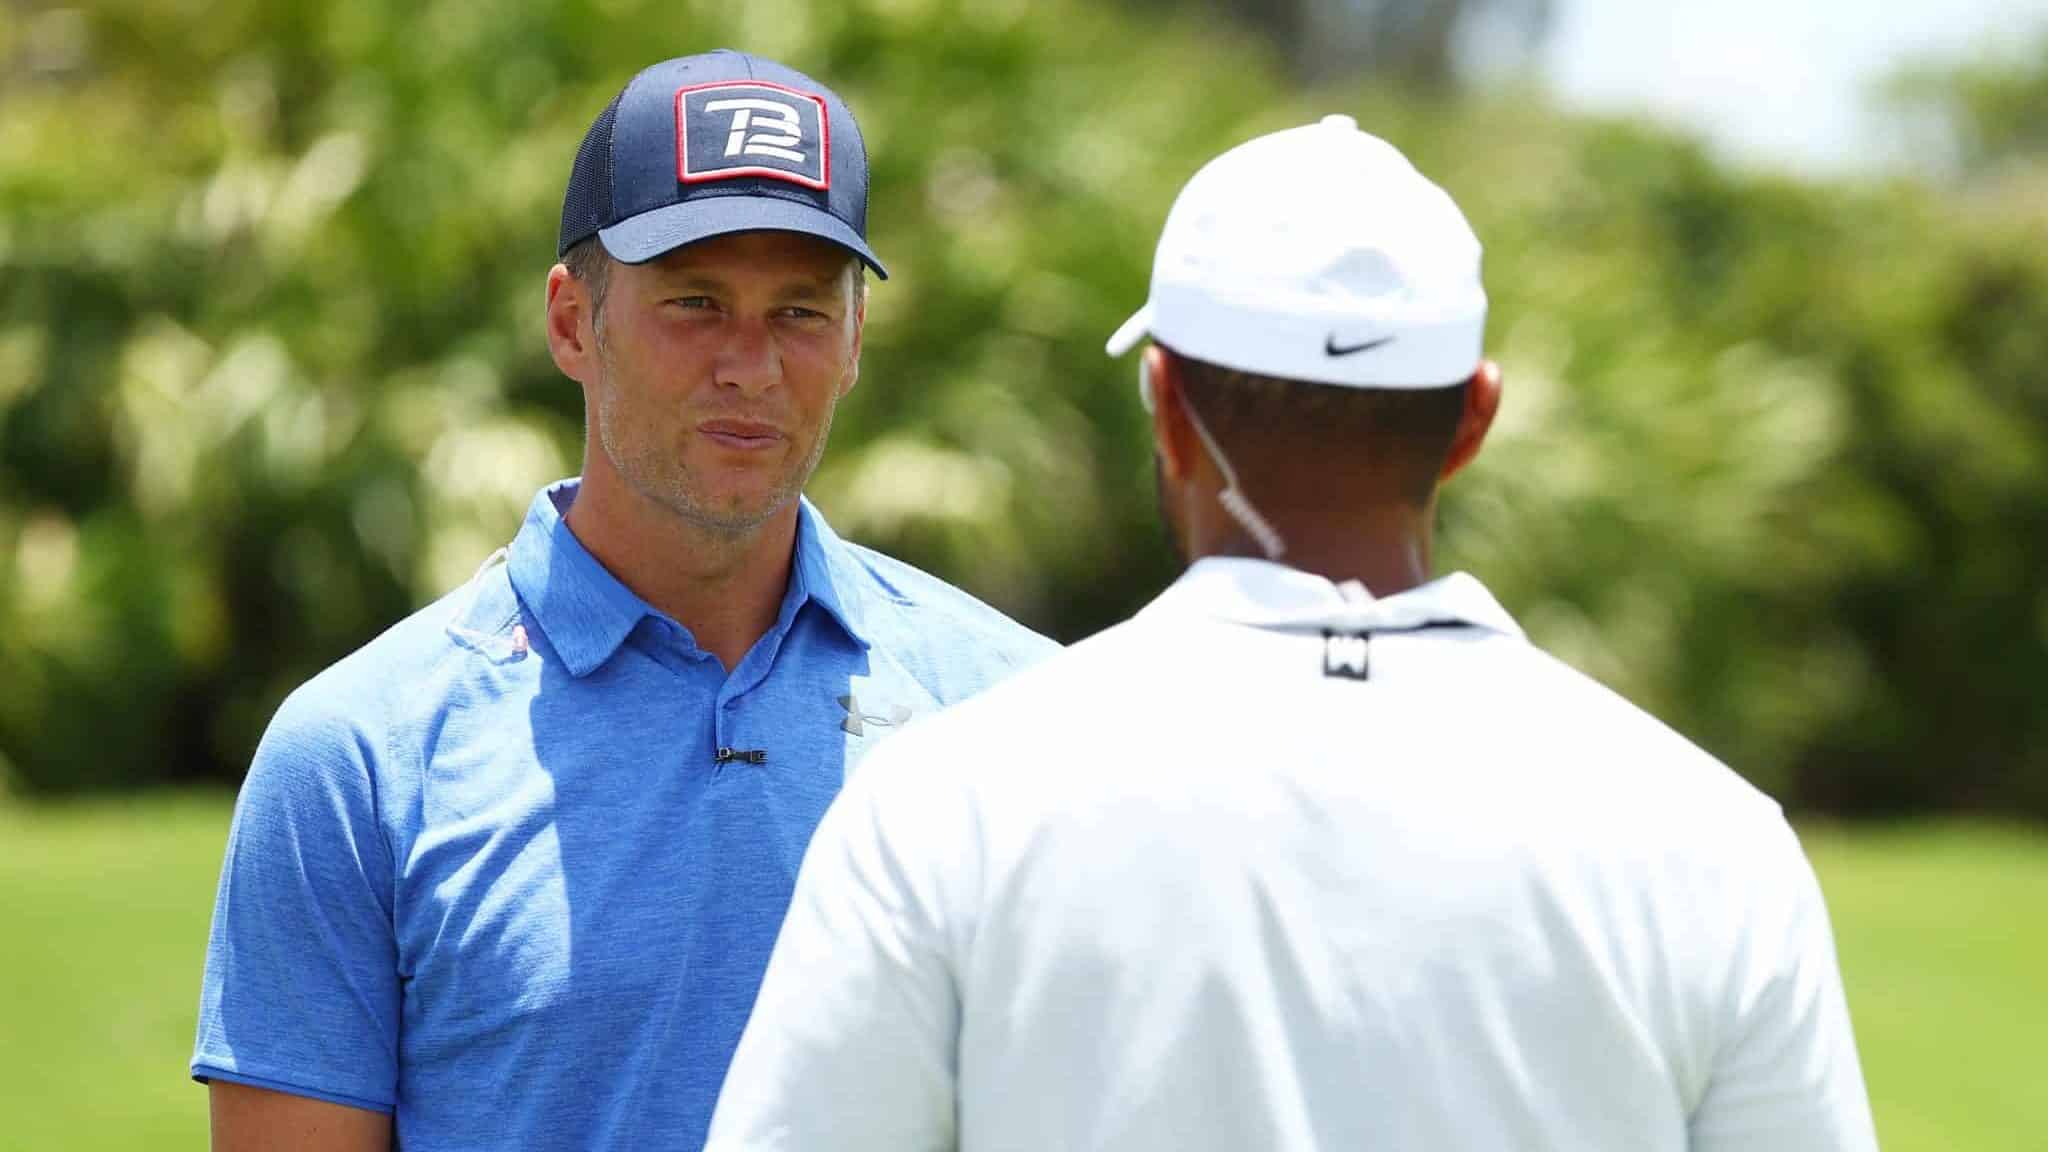 HOBE SOUND, FLORIDA - MAY 23: NFL player Tom Brady of the Tampa Bay Buccaneers talks to Tiger Woods during a practice round for The Match: Champions For Charity at Medalist Golf Club on May 23, 2020 in Hobe Sound, Florida.